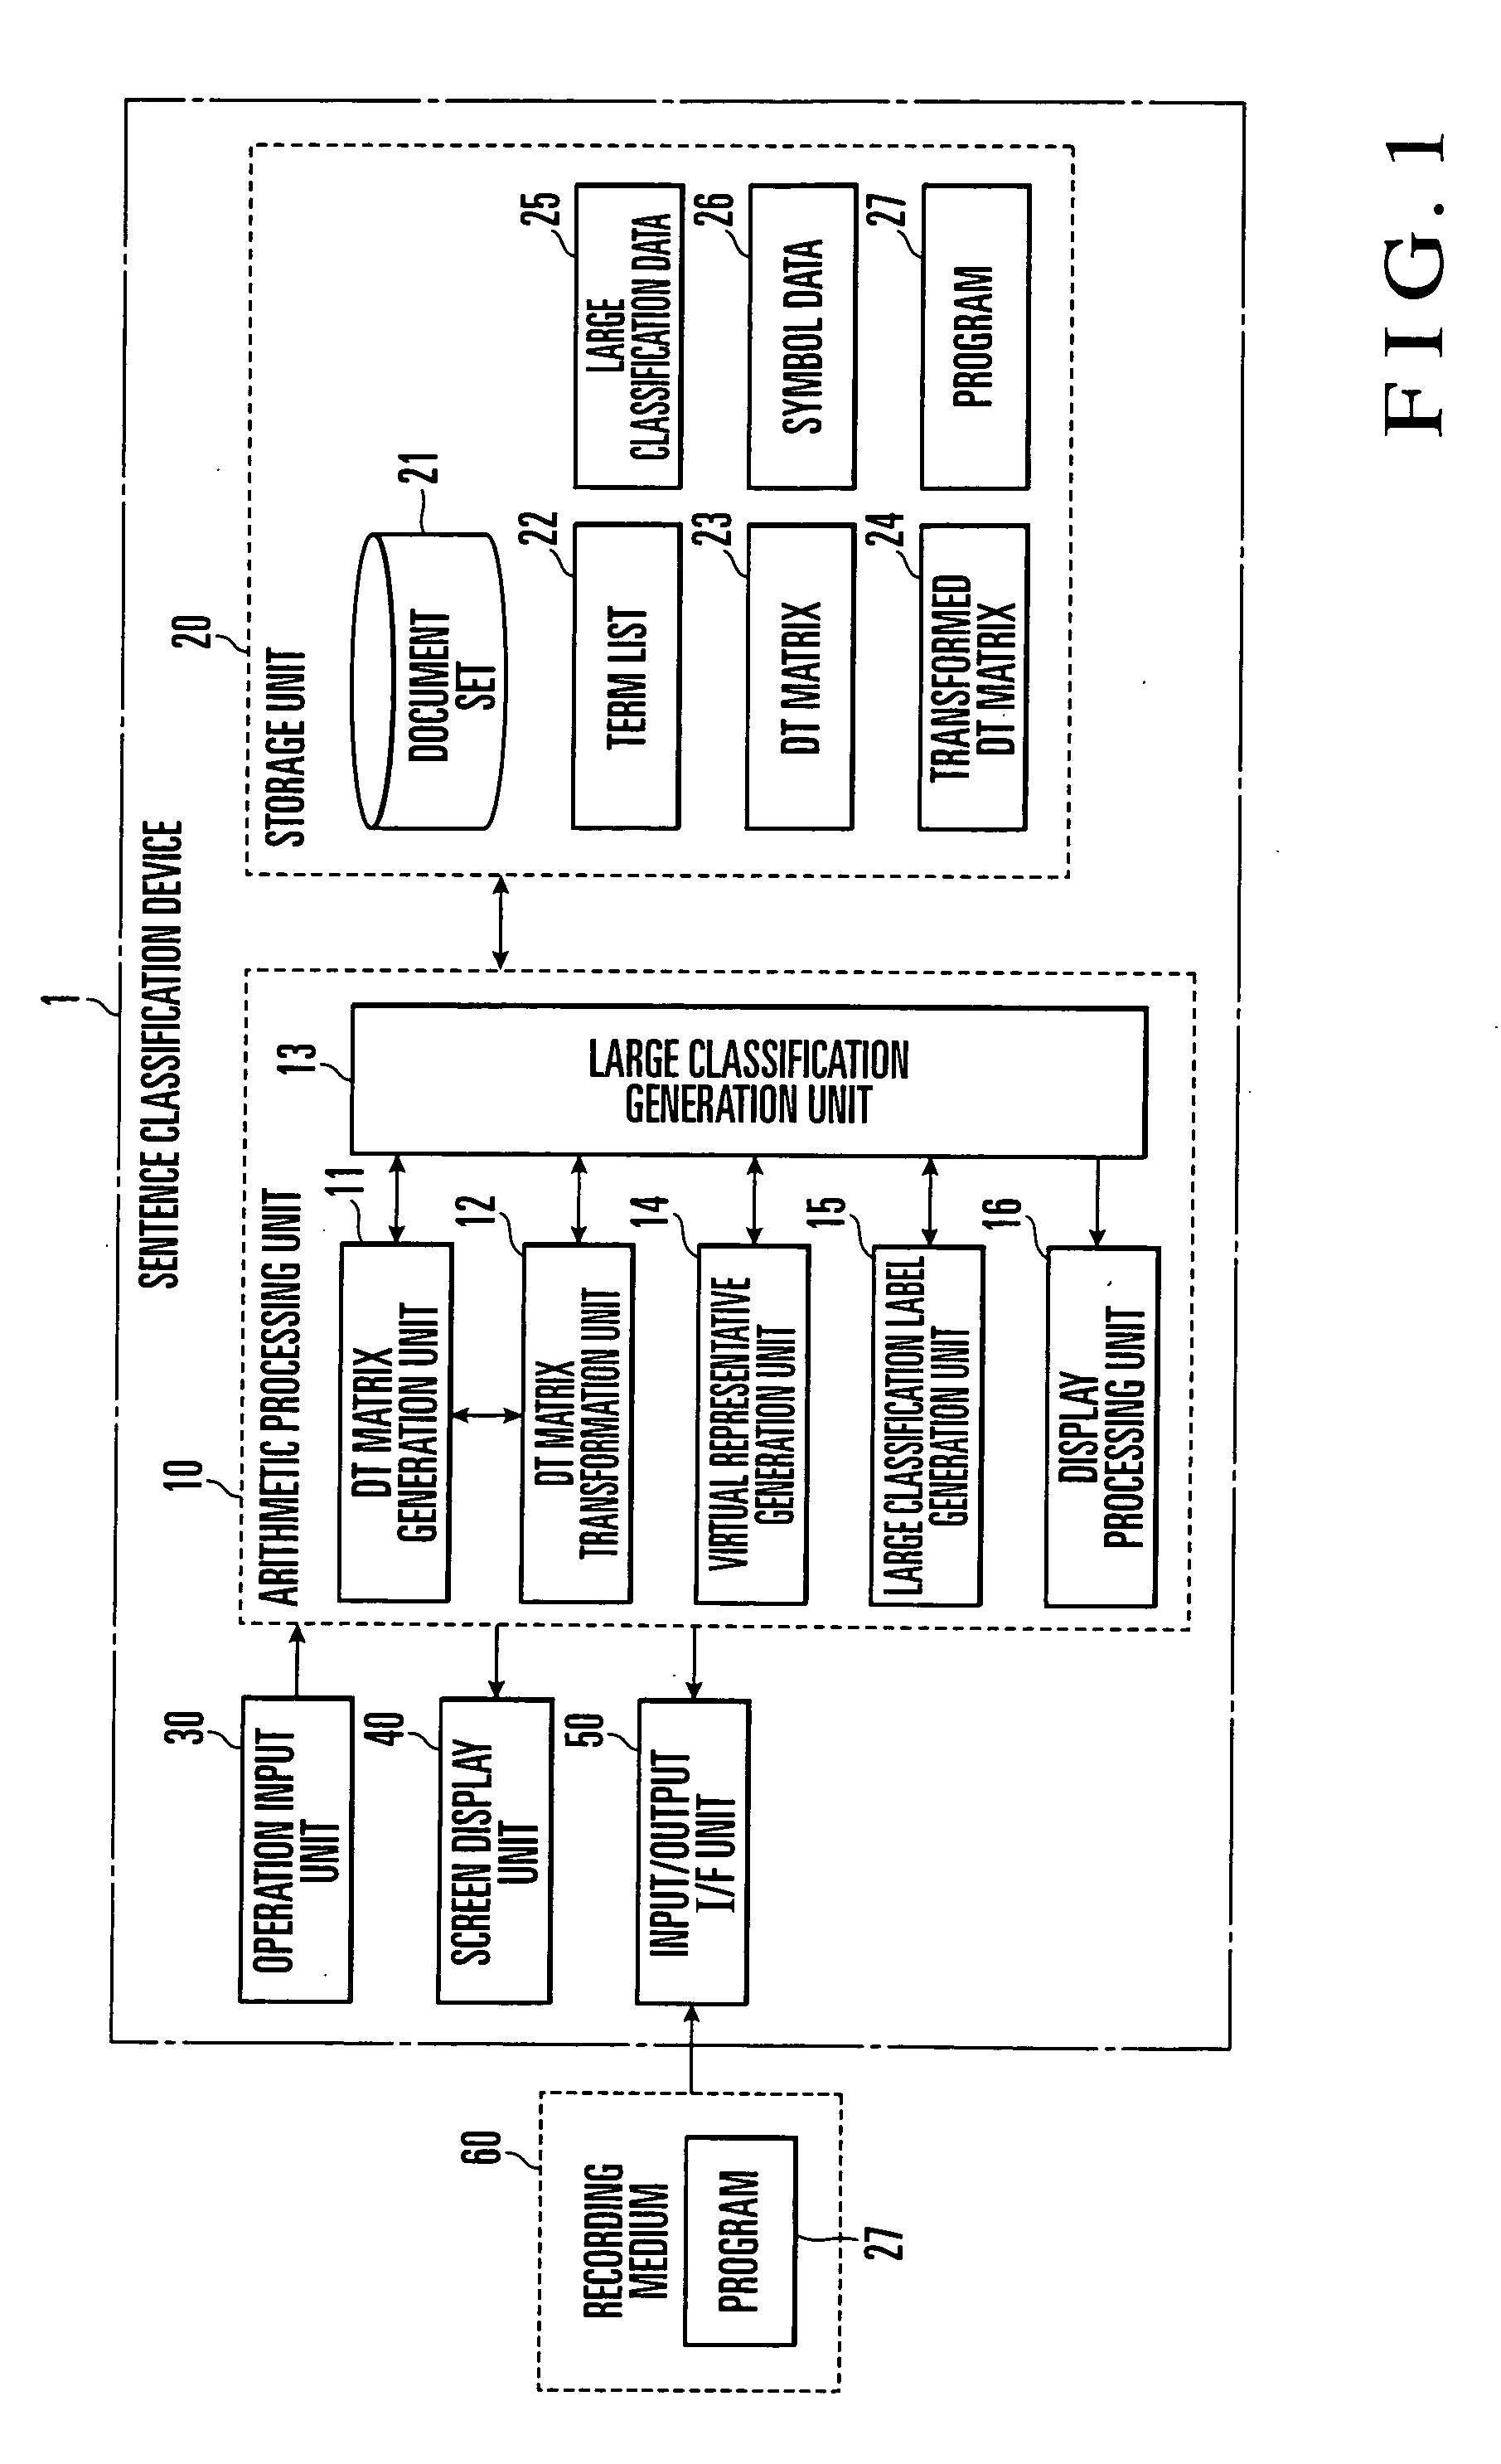 Sentence classification device and method